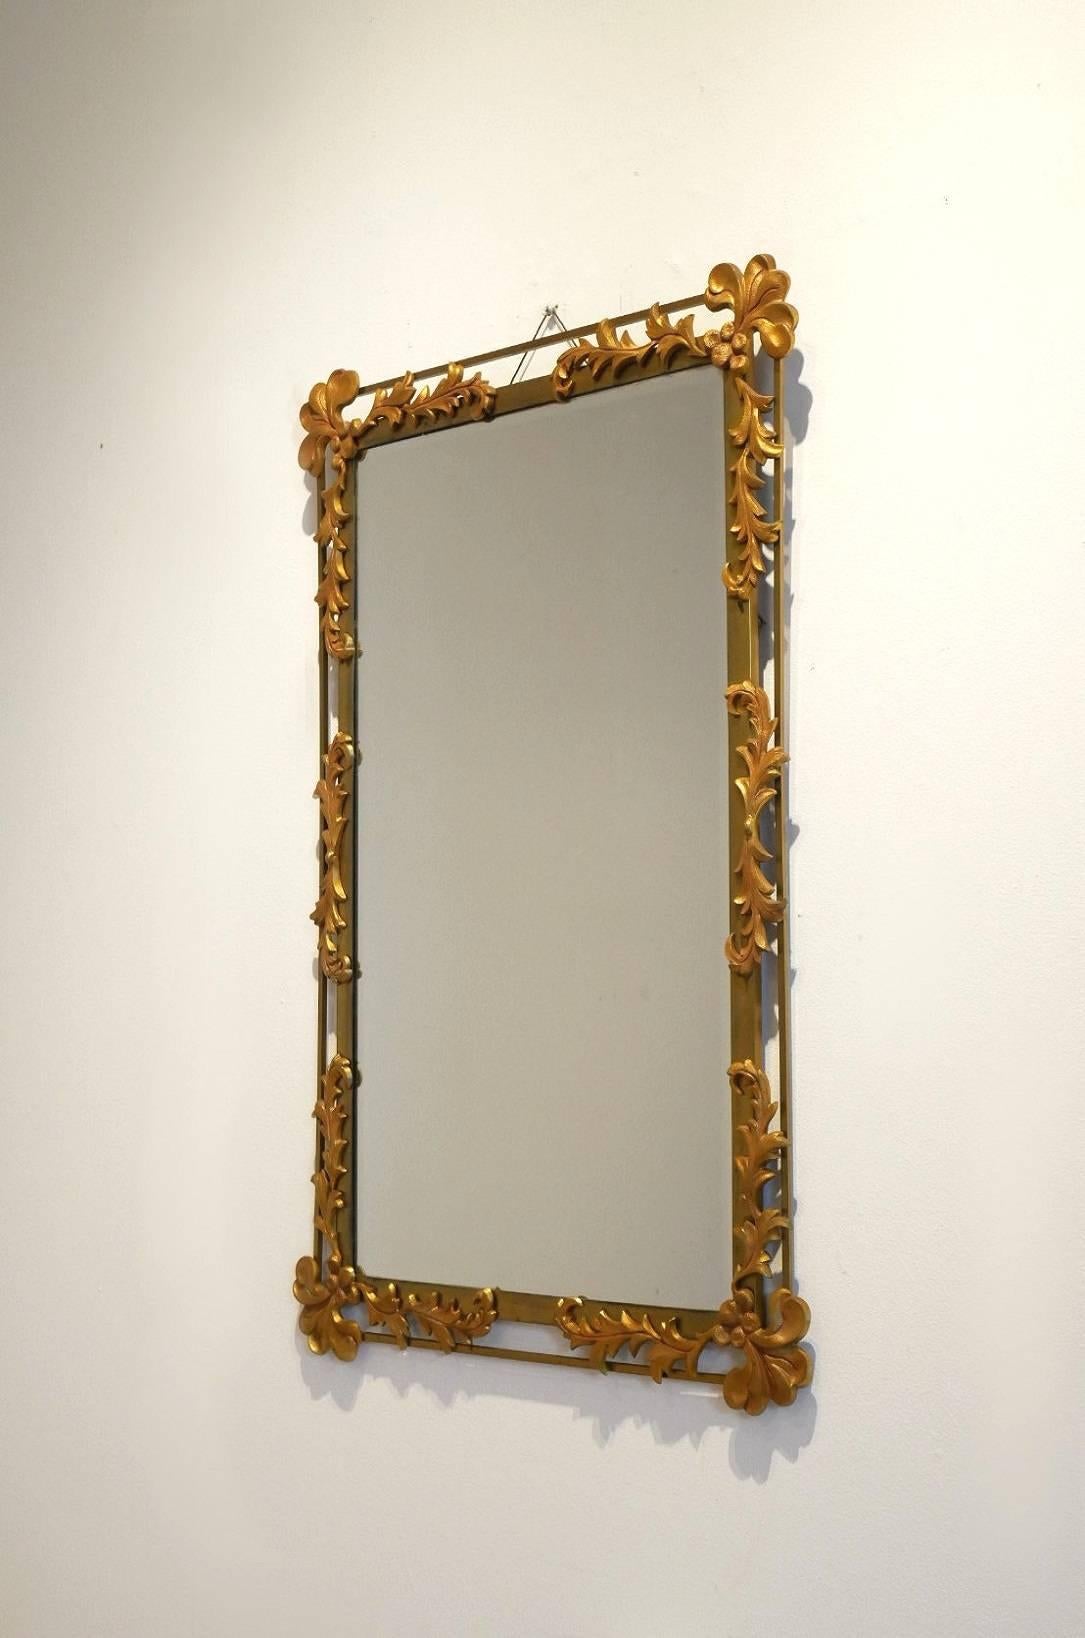 Decorative 1950s wall-mounted mirror, bicolor gilded and painted metal structure with vegetal decor.